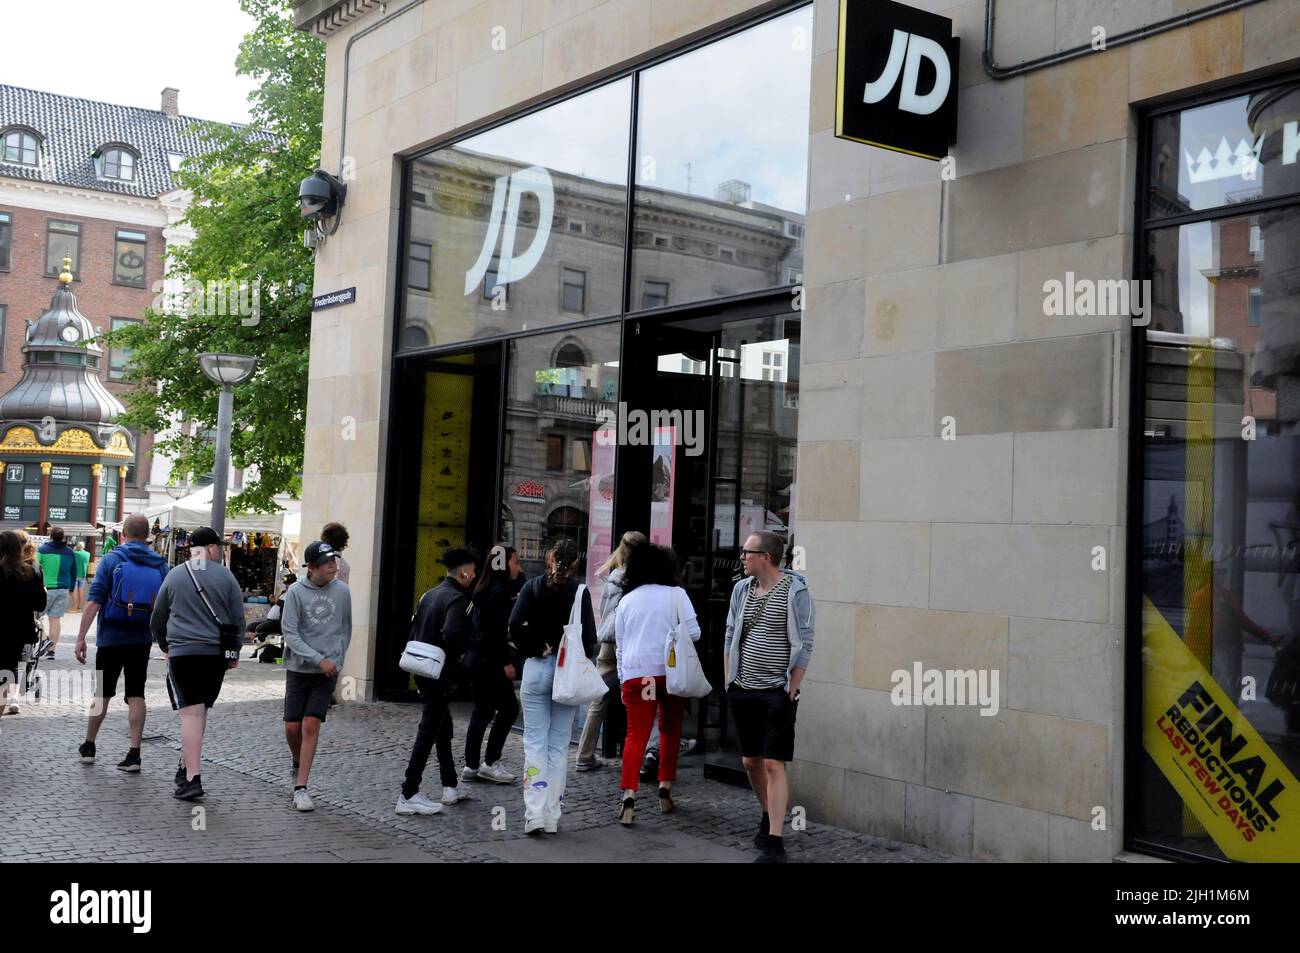 Jd sports store hi-res stock photography and images - Page 2 - Alamy